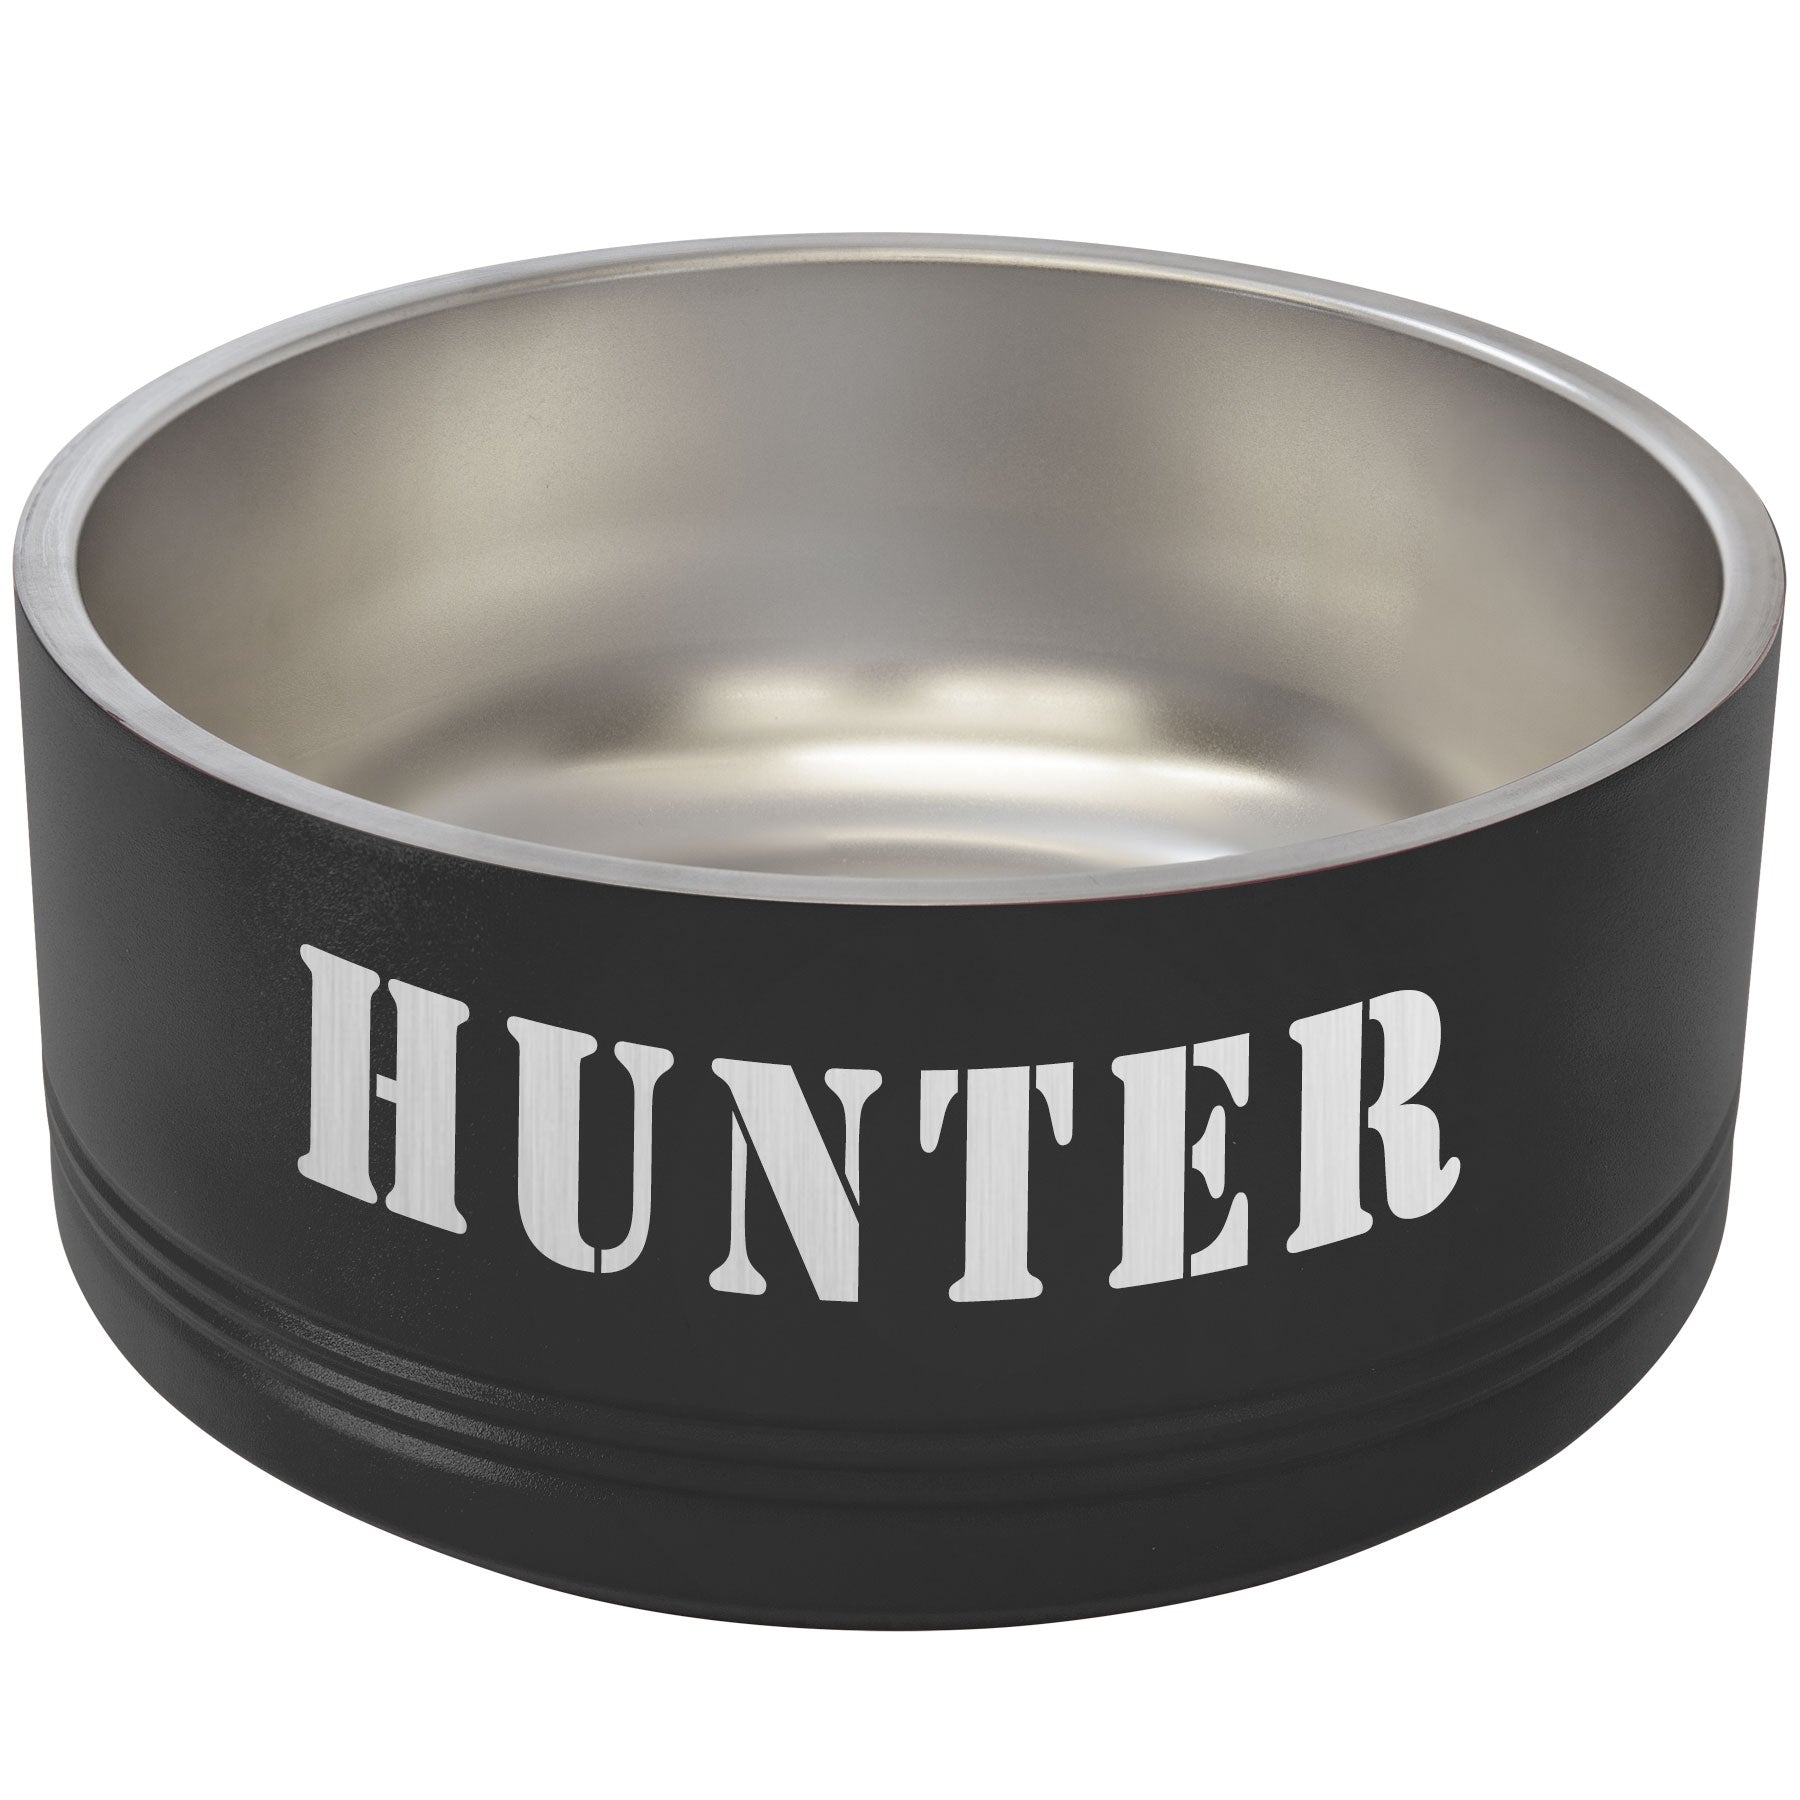 64 oz Stainless Steel Insulated Pet Bowl